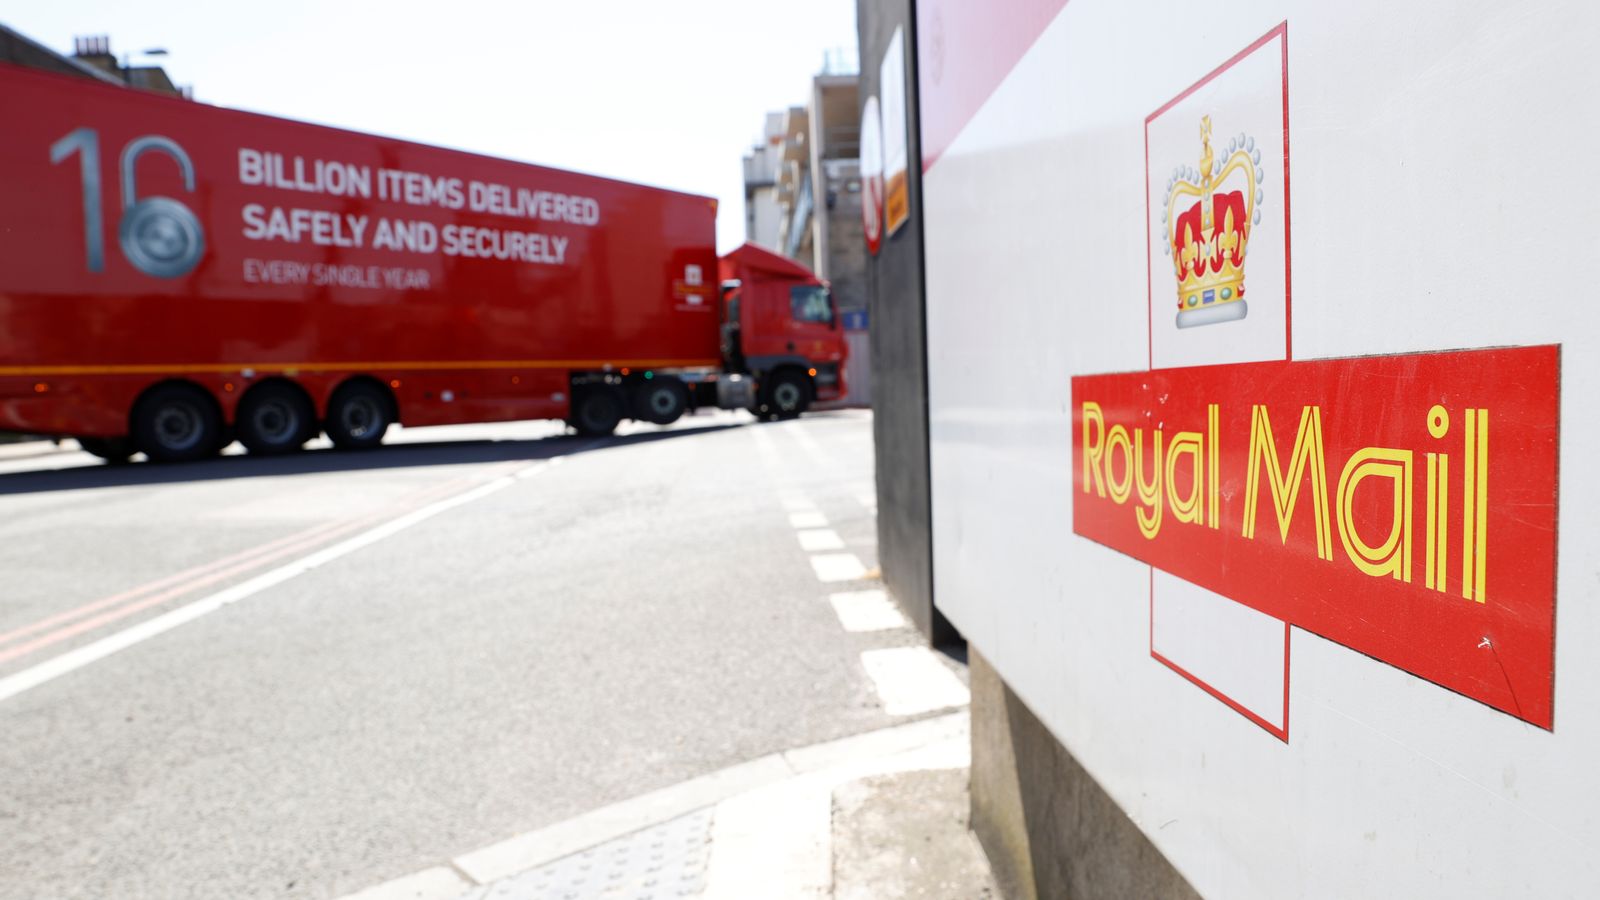 Royal Mail reports £319m half-year loss - and blames economy and strikes